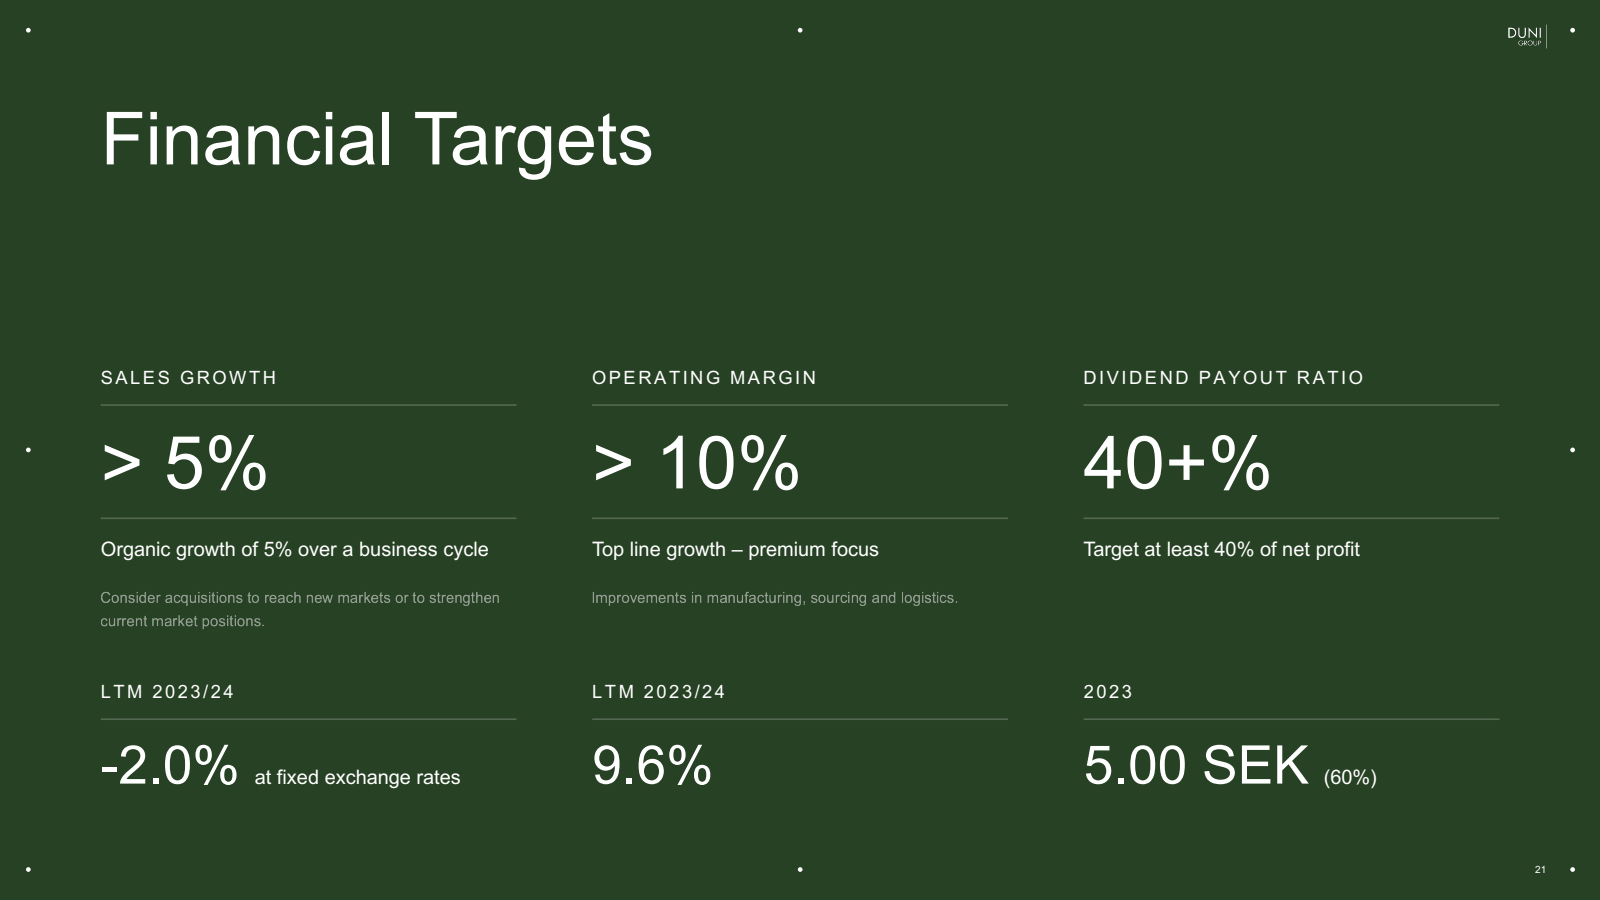 Financial Targets 

